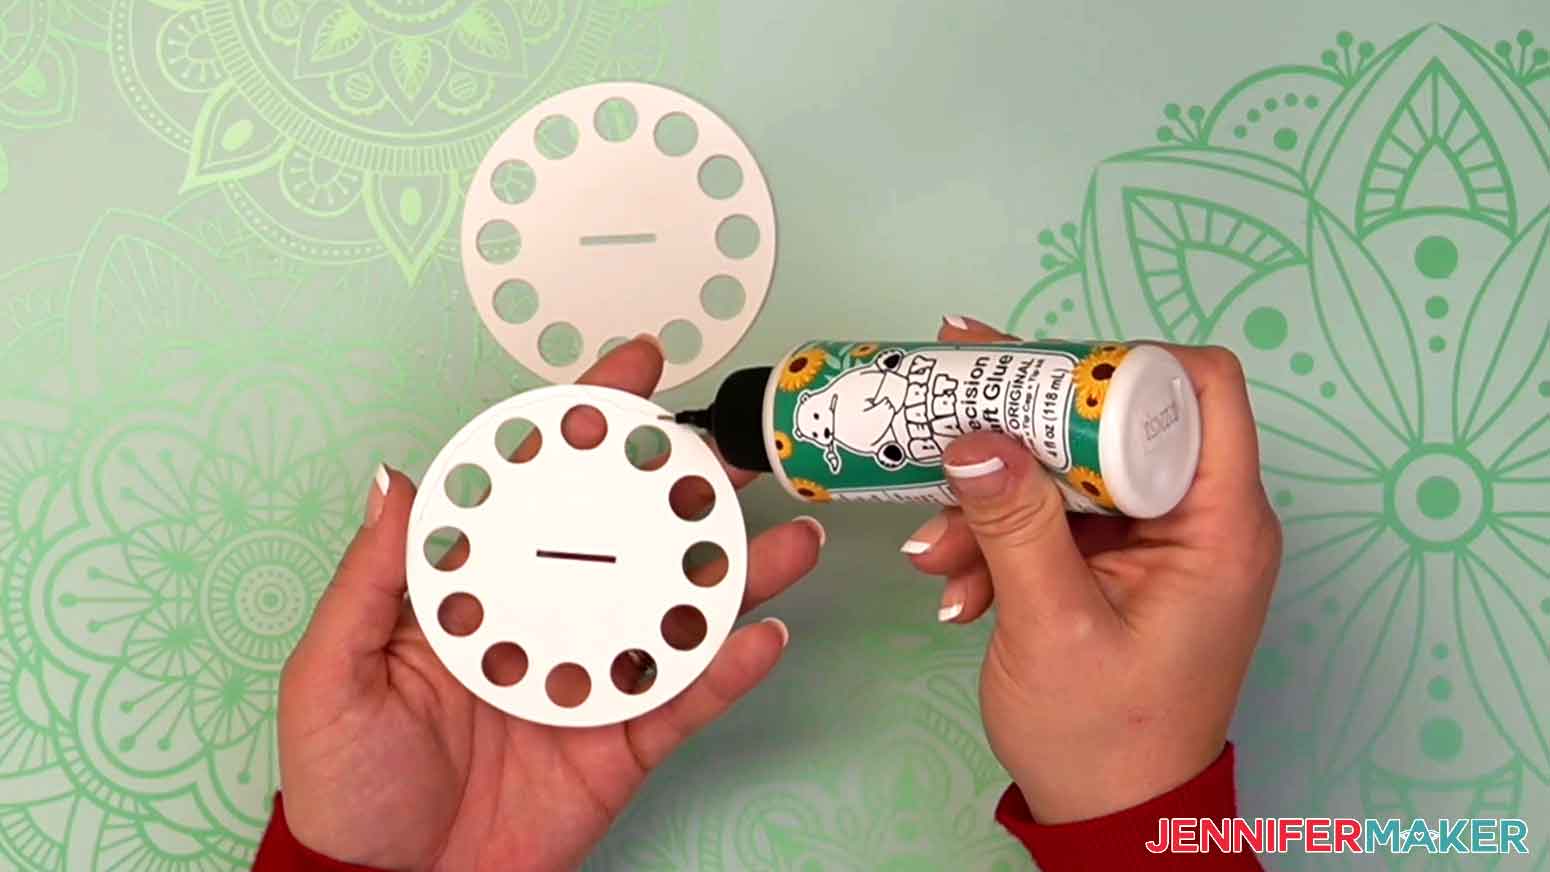 Apply small dots of craft glue around first tier and glue three layers together with the holes aligned.